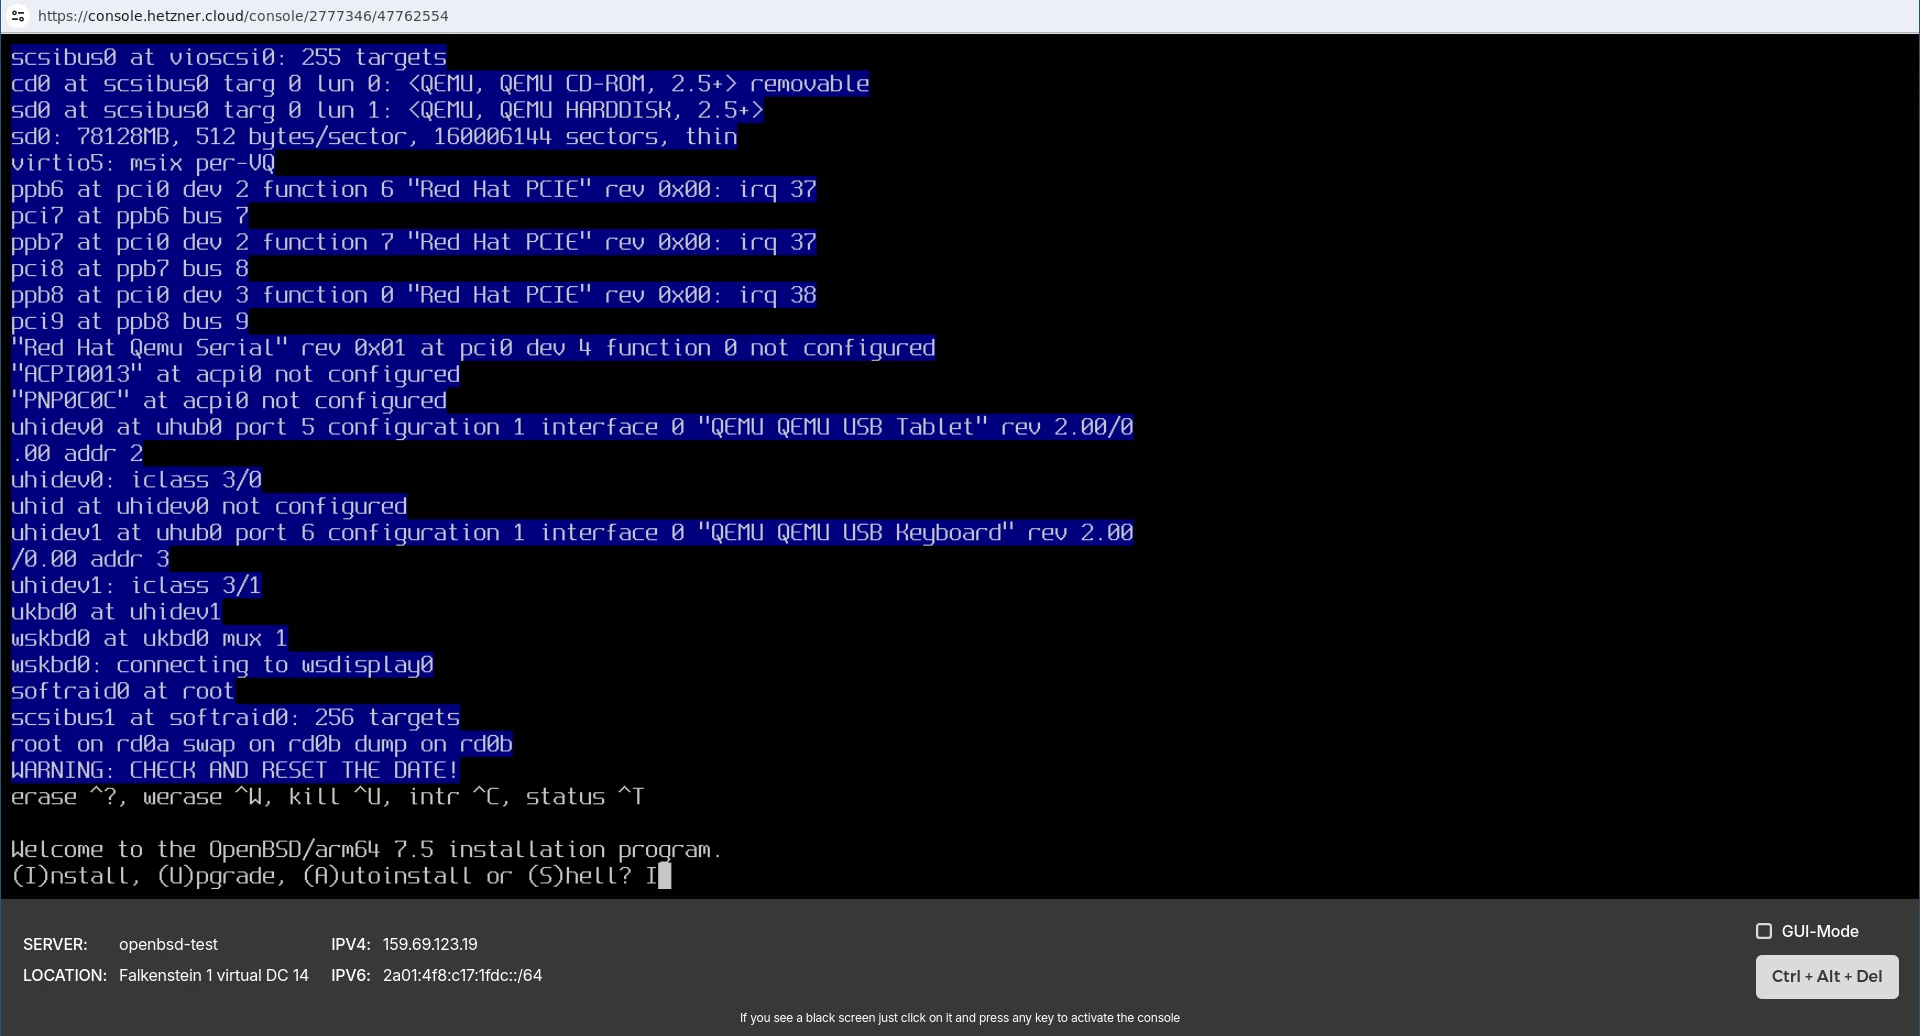 Viewing the OpenBSD installer in the Hetzner KVM console